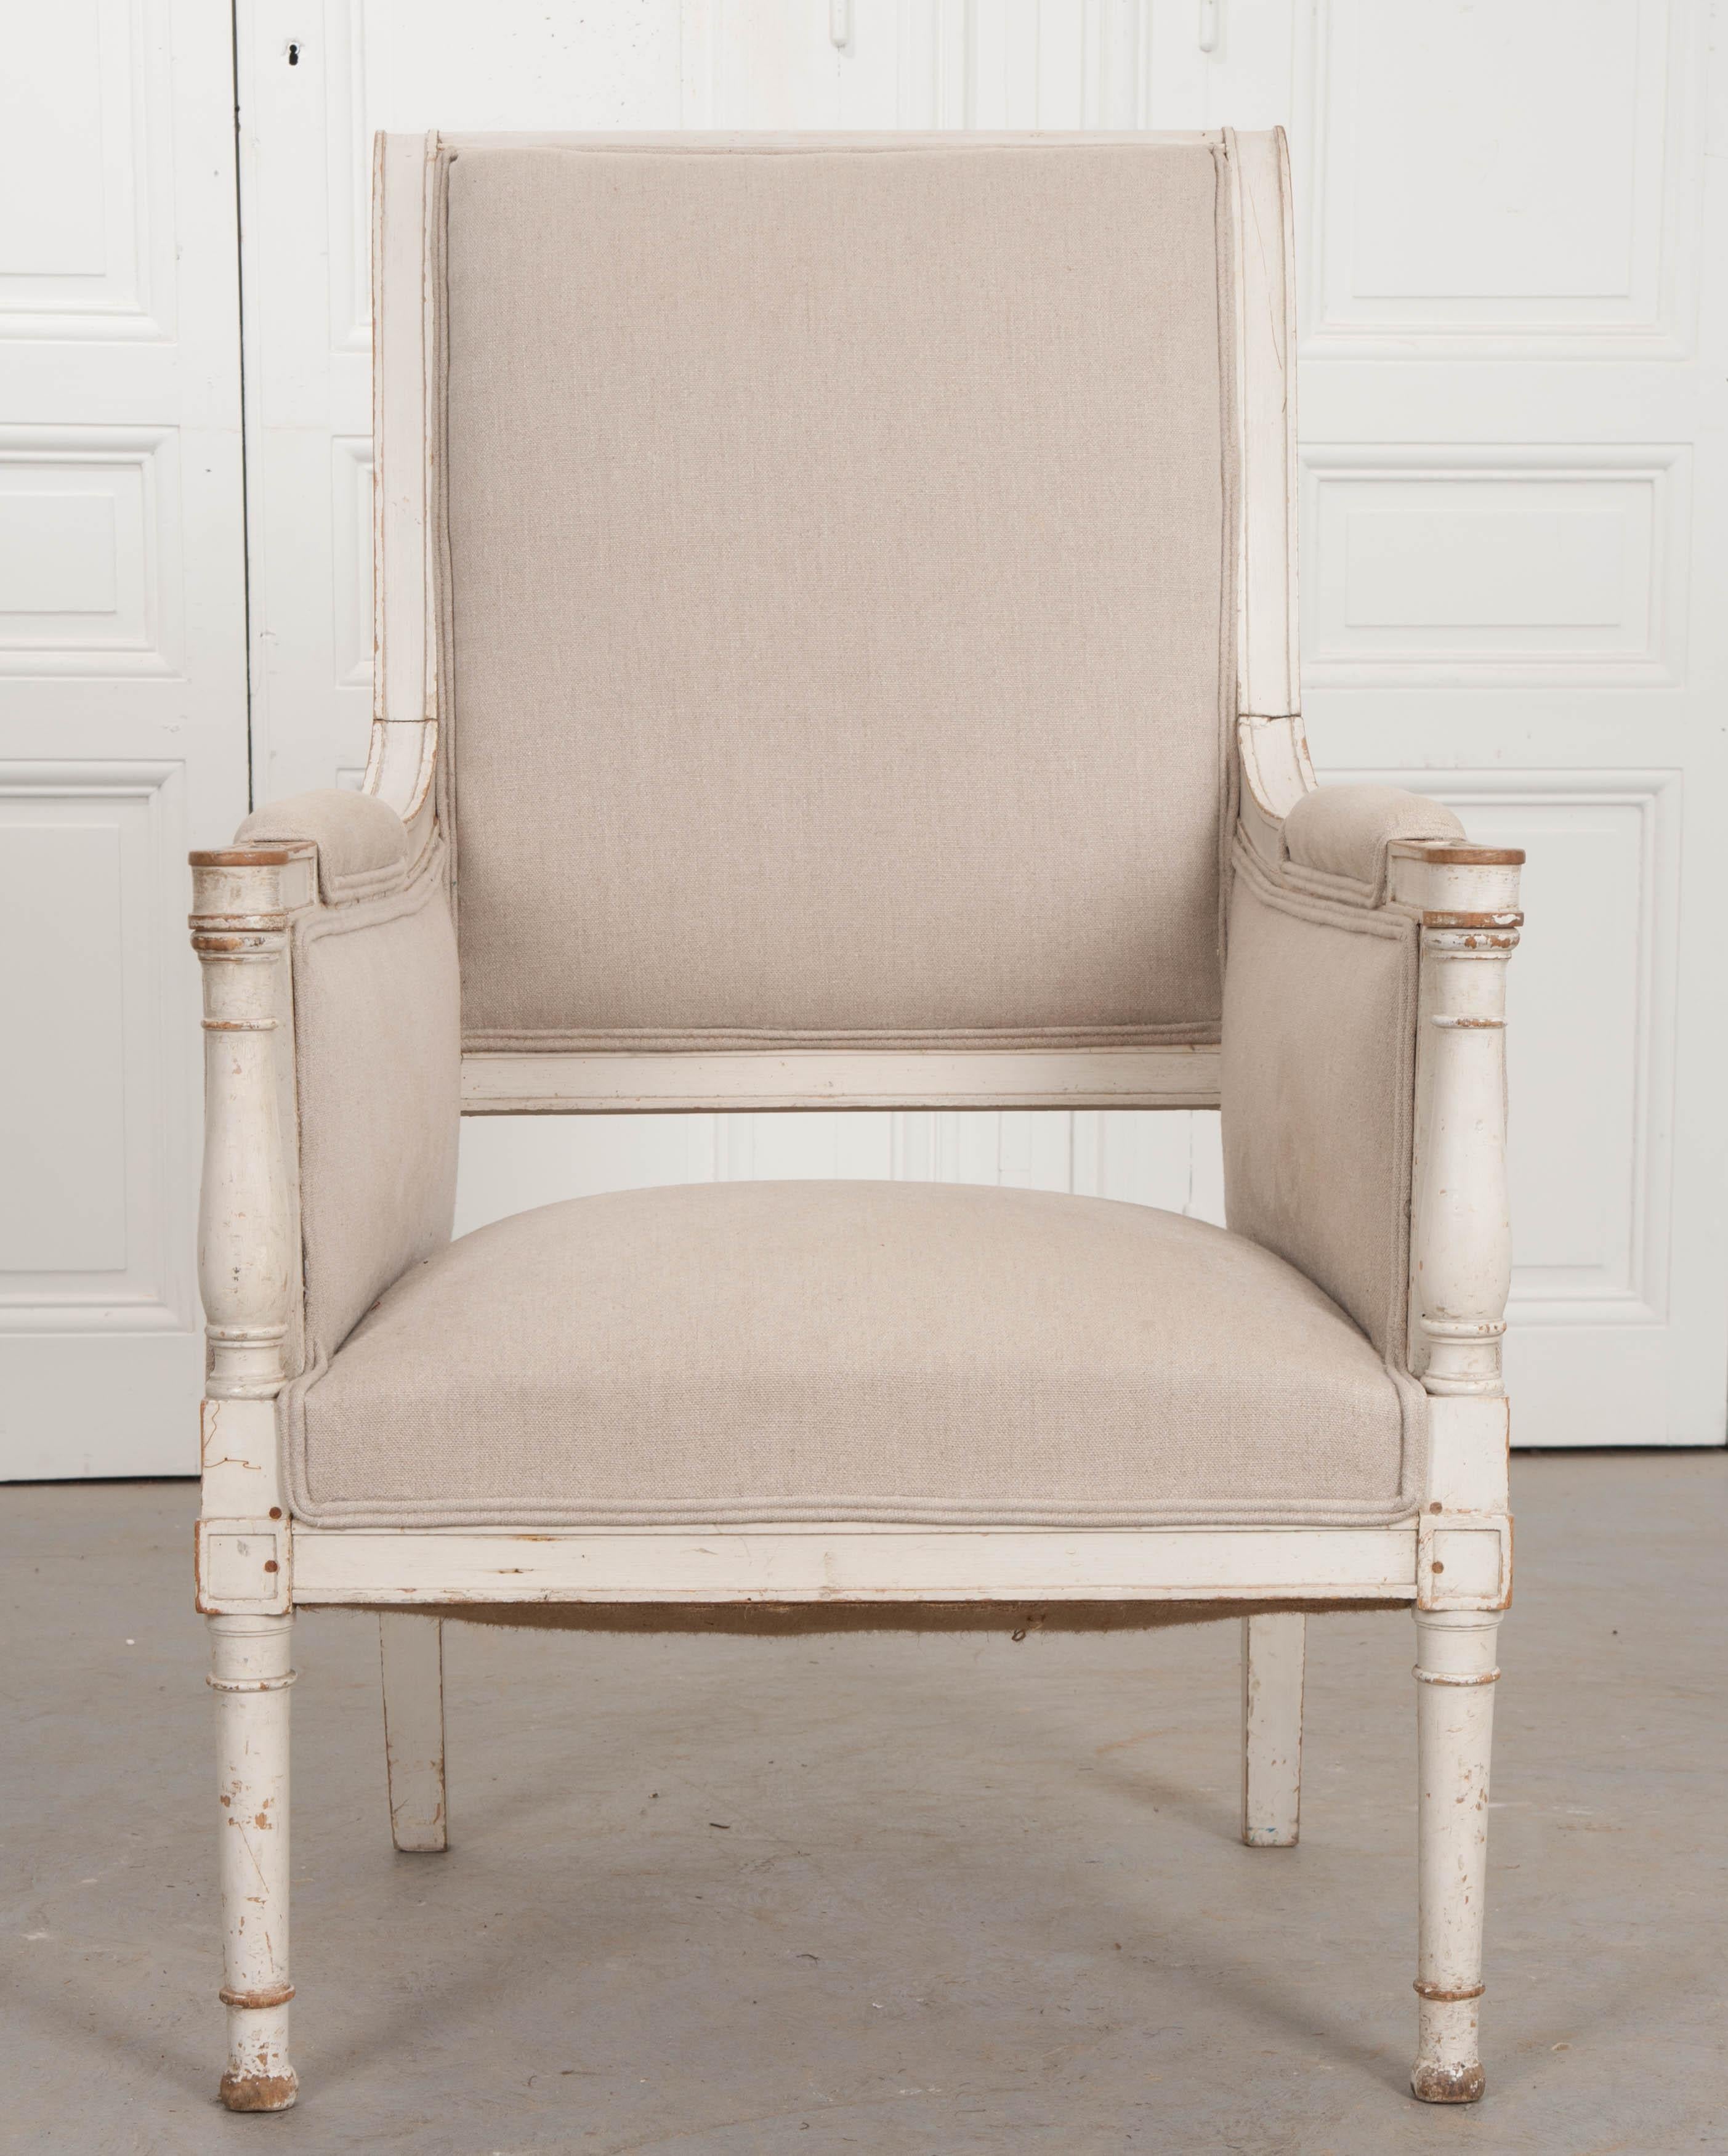 A newly upholstered 19th century Swedish armchair with painted frame. Borrowing elements of both Louis XVI and Empirically styled French furniture, this Swedish Gustavian armchair combines elegance and comfort like few can. The chair is covered in a